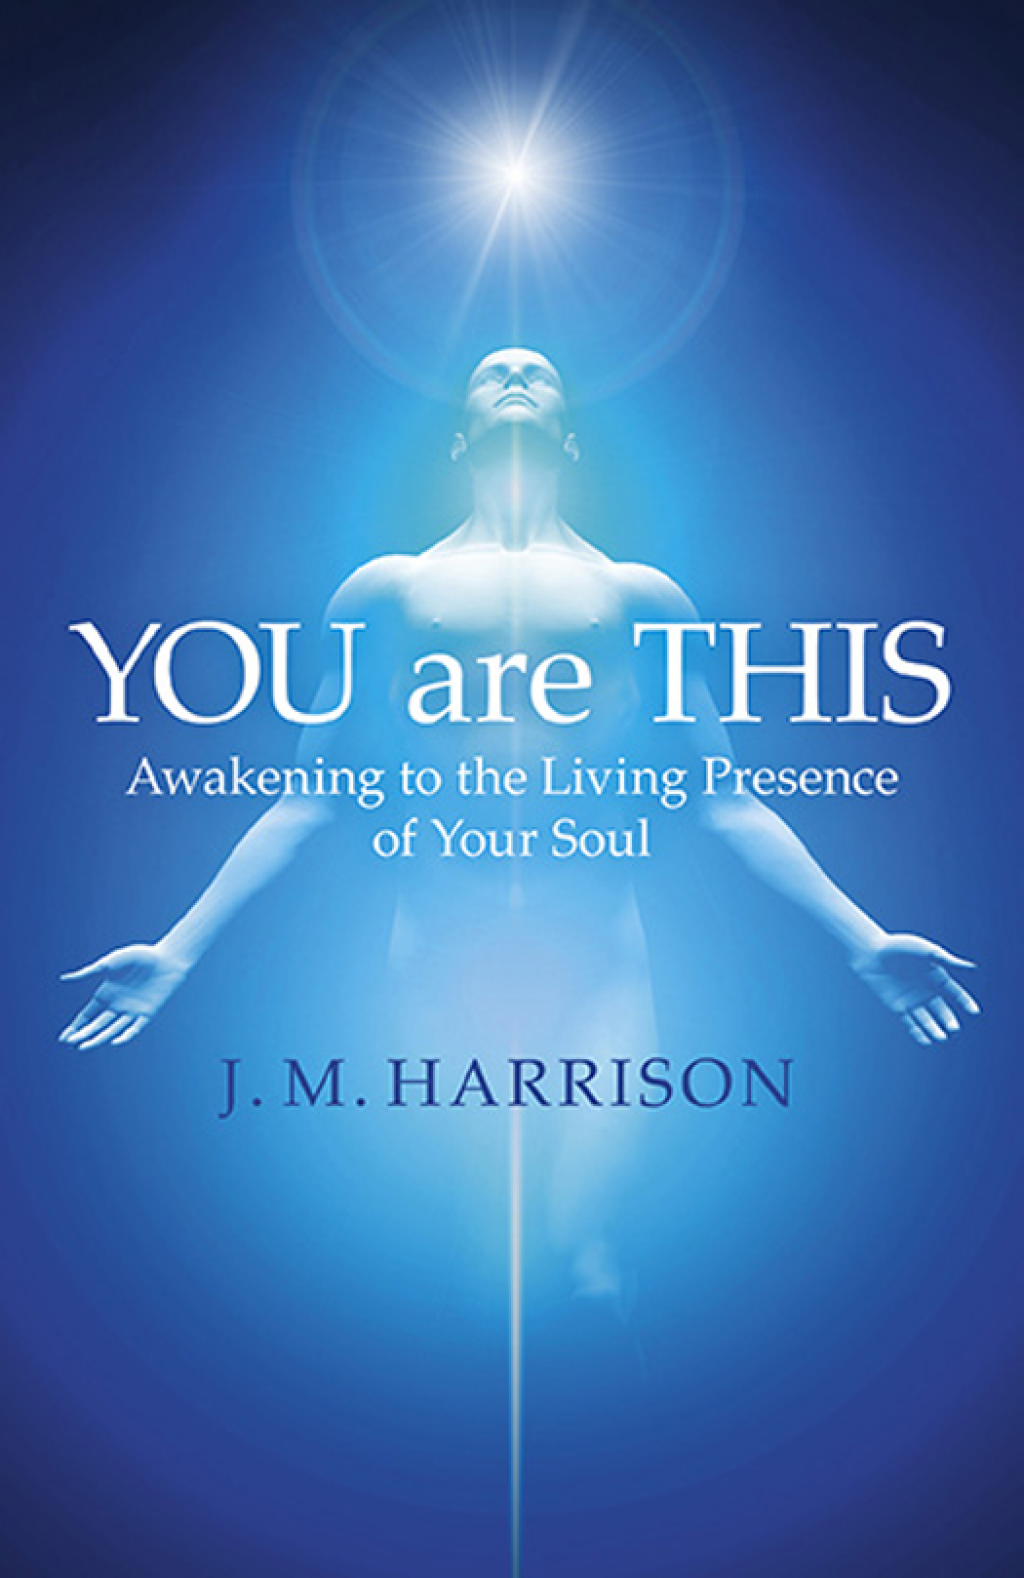 YOU are THIS: Awakening to the Living Presence of Your Soul (eBook) - J. M. Harrison,